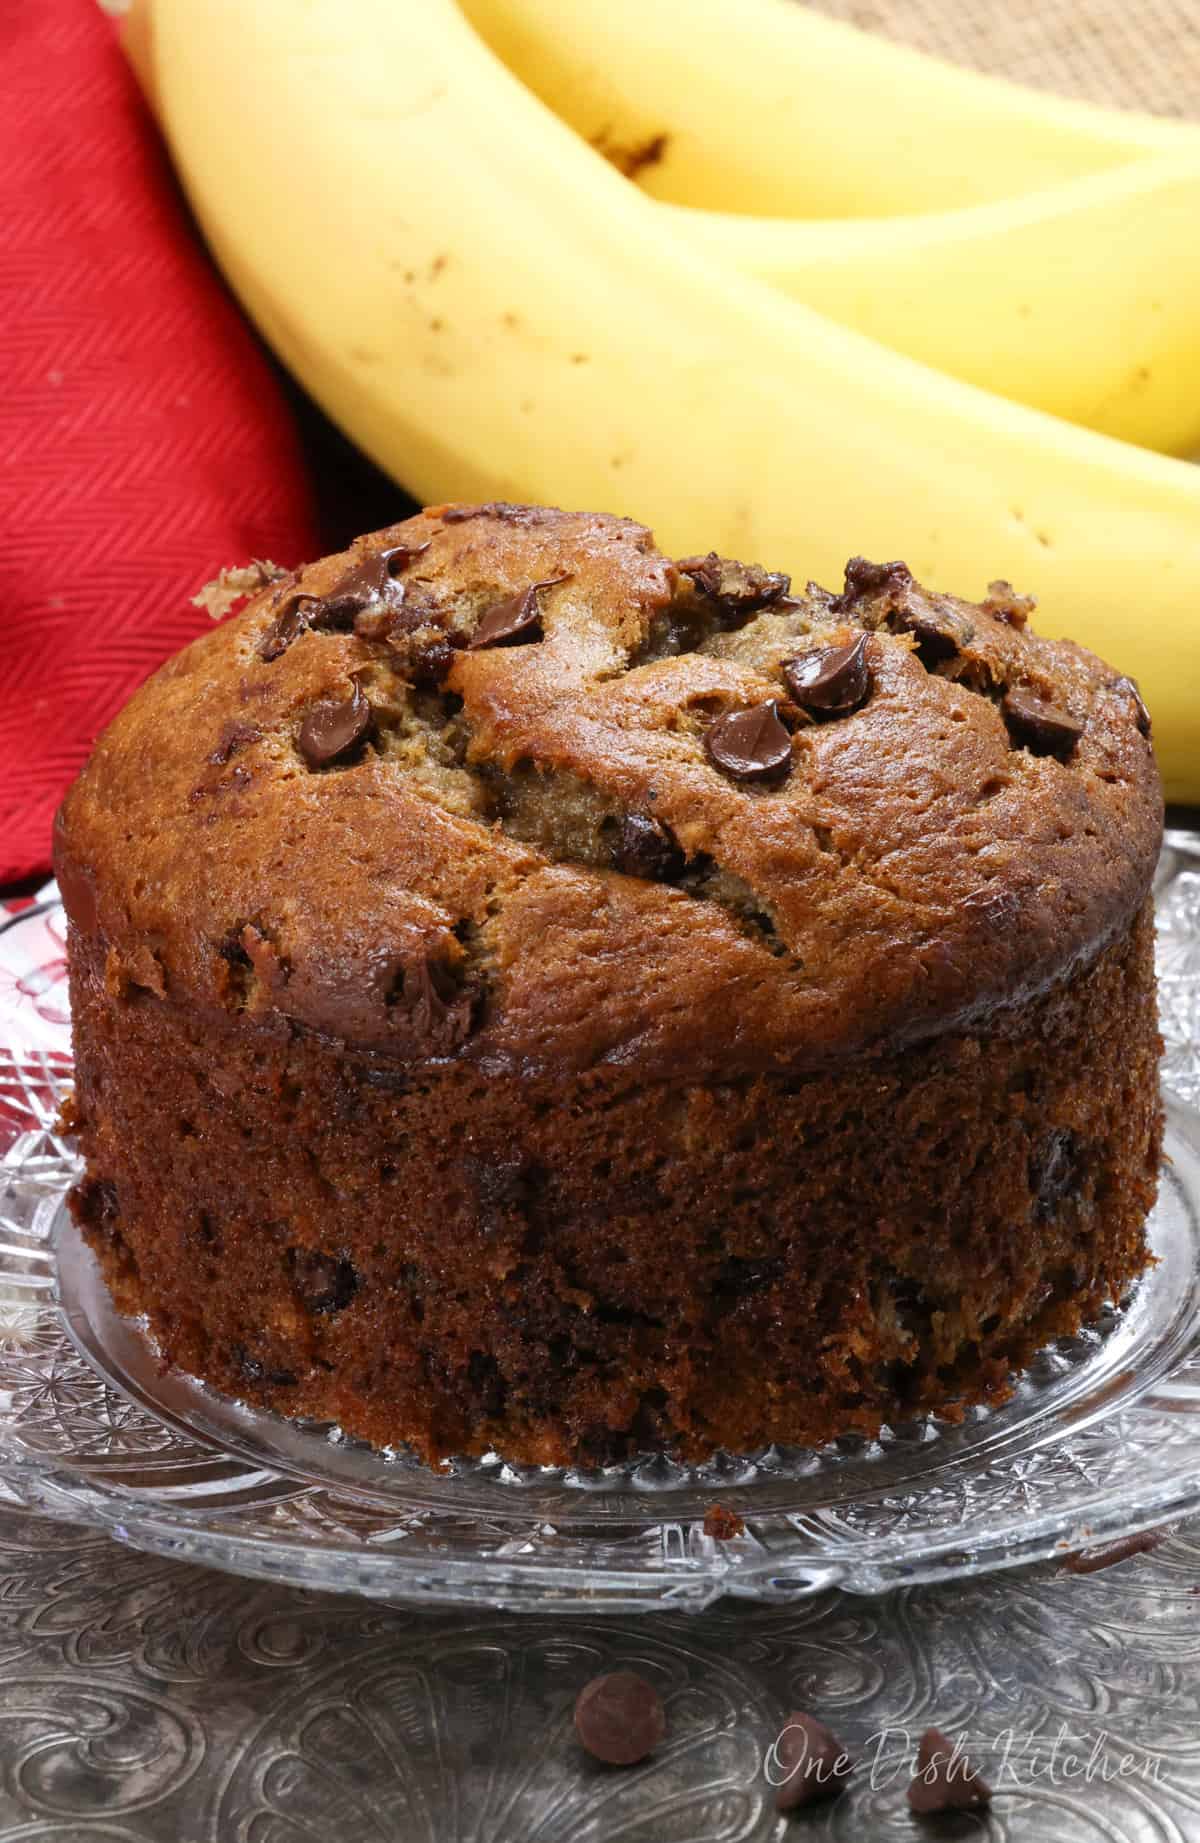 one small chocolate chip banana bread on a plate next to a red napkin and one banana.